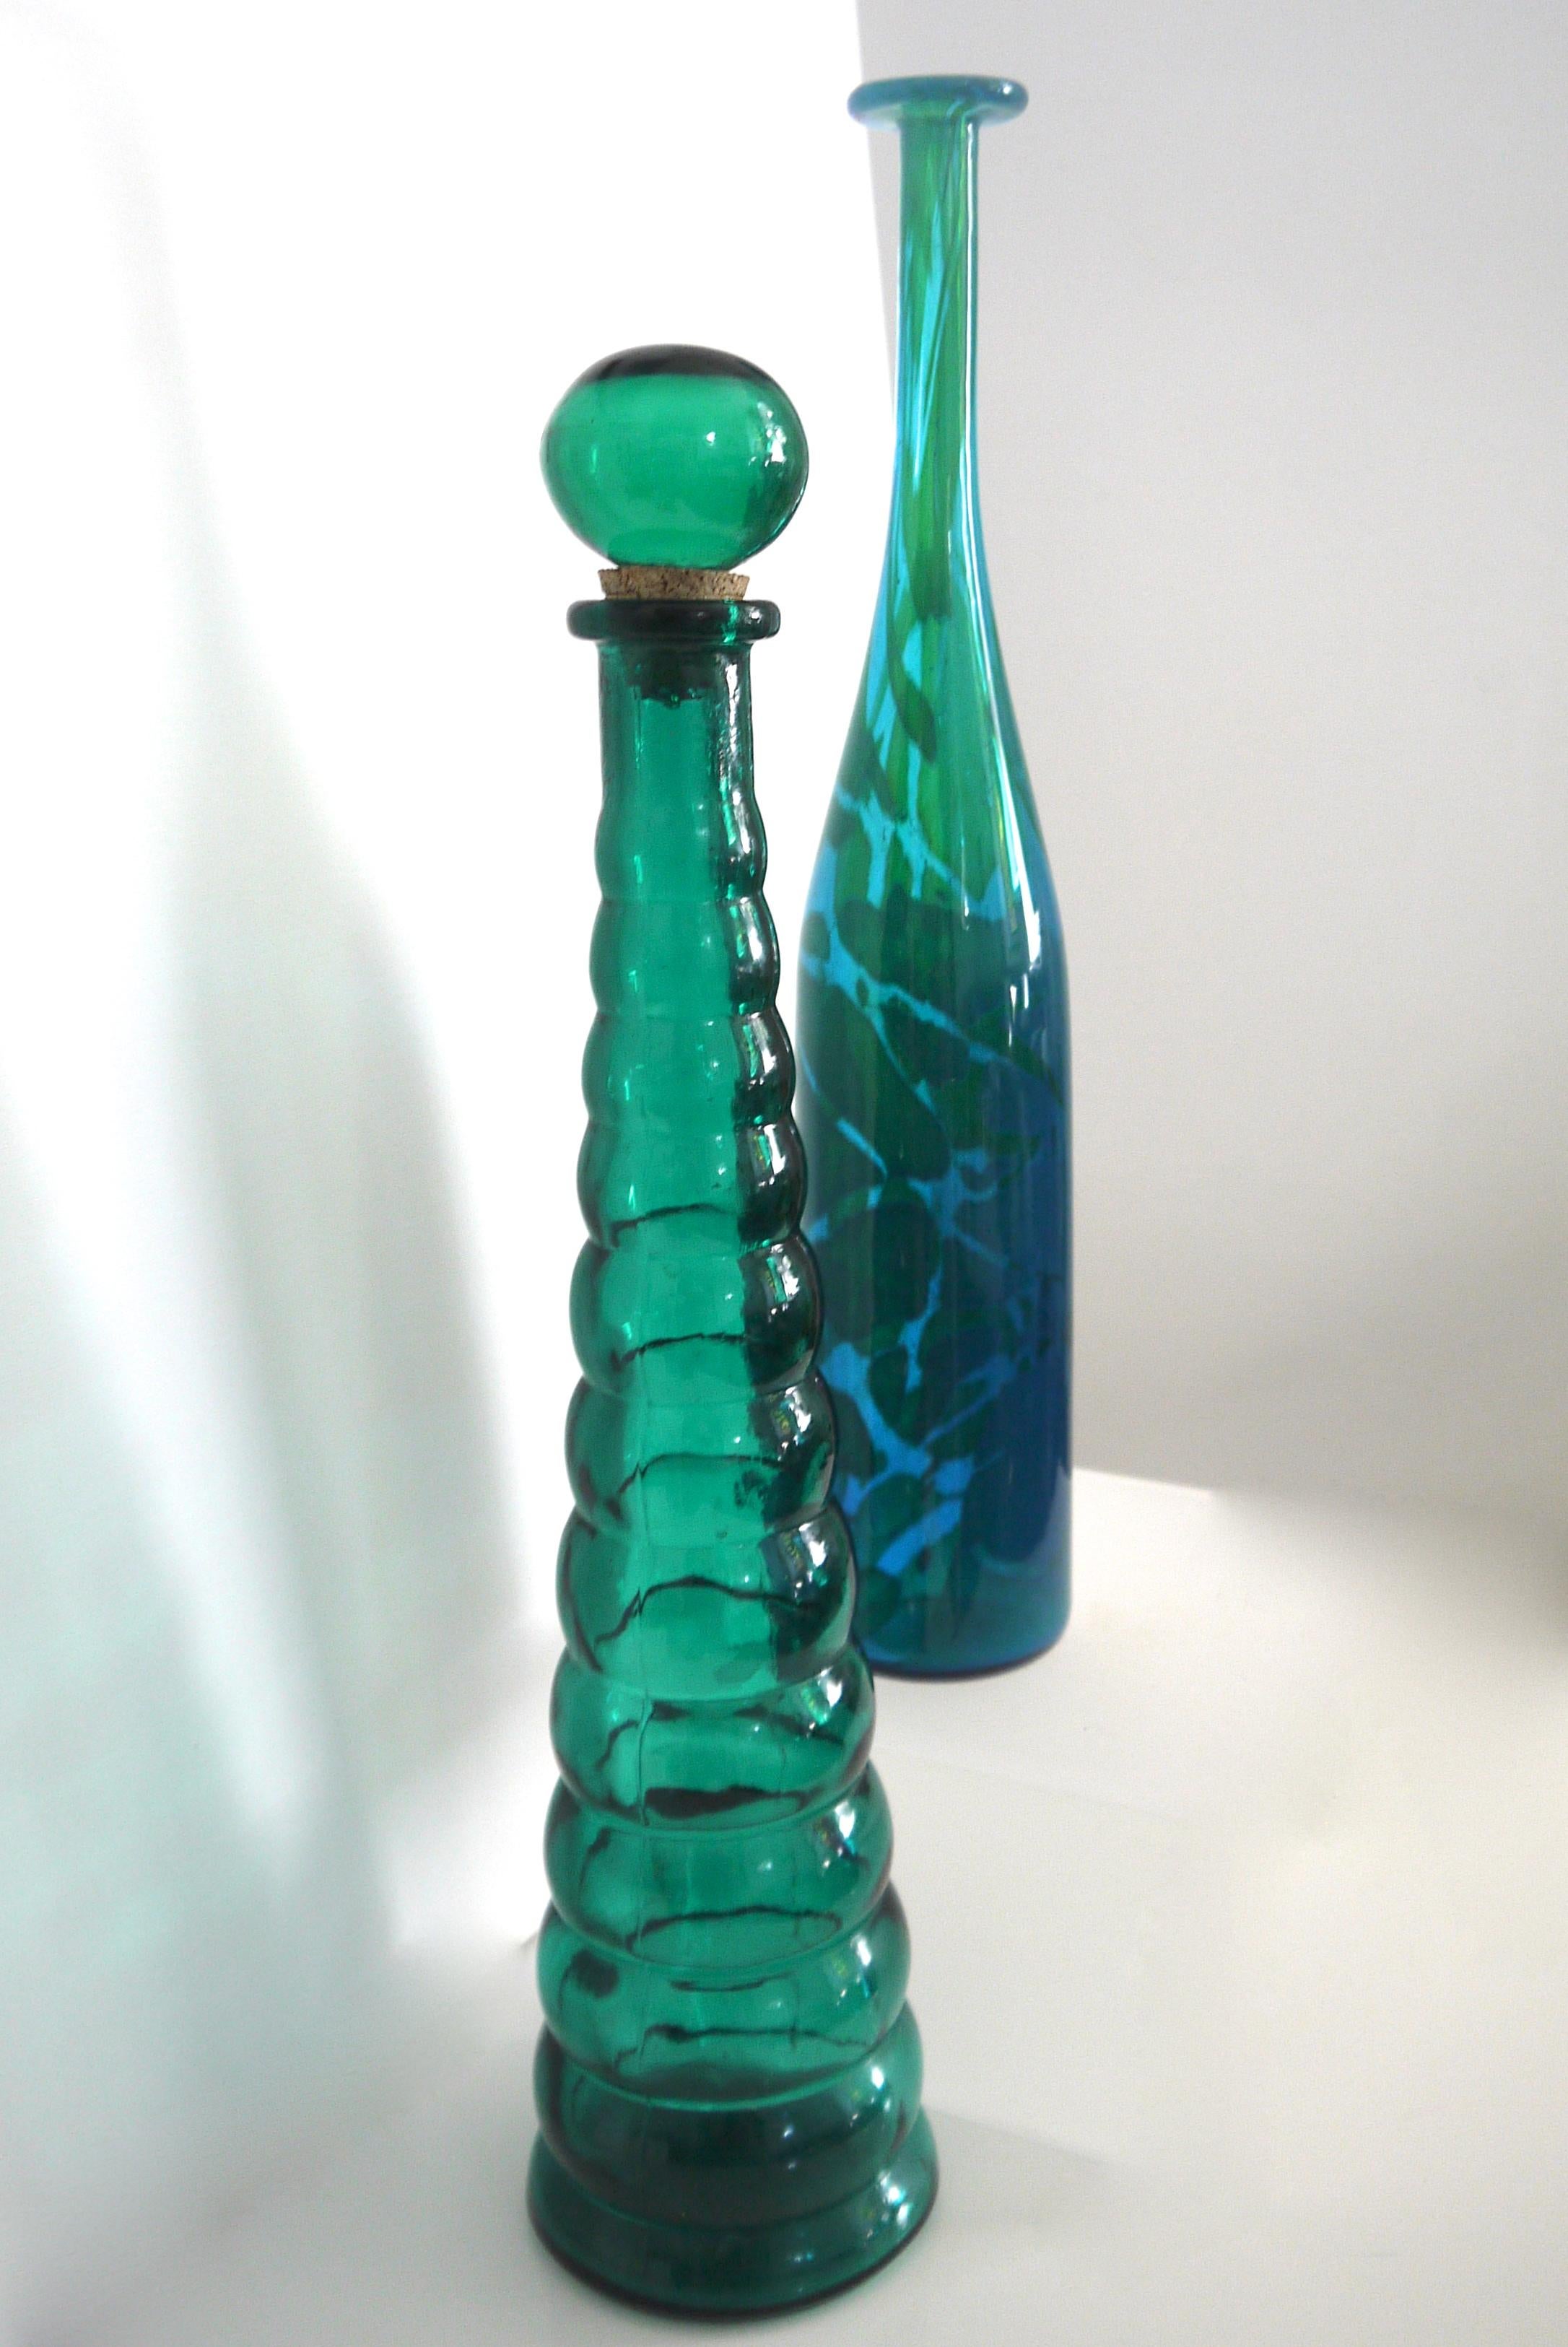 Italian Empoli moulded glass bottle from late 1950s with Mdina freeform sculpture Michael Harris early 1960s
Michael Harris sculpture was made during his time in Malta heavily inspired by the Mediterranean Sea.

The moulded bottle is from the